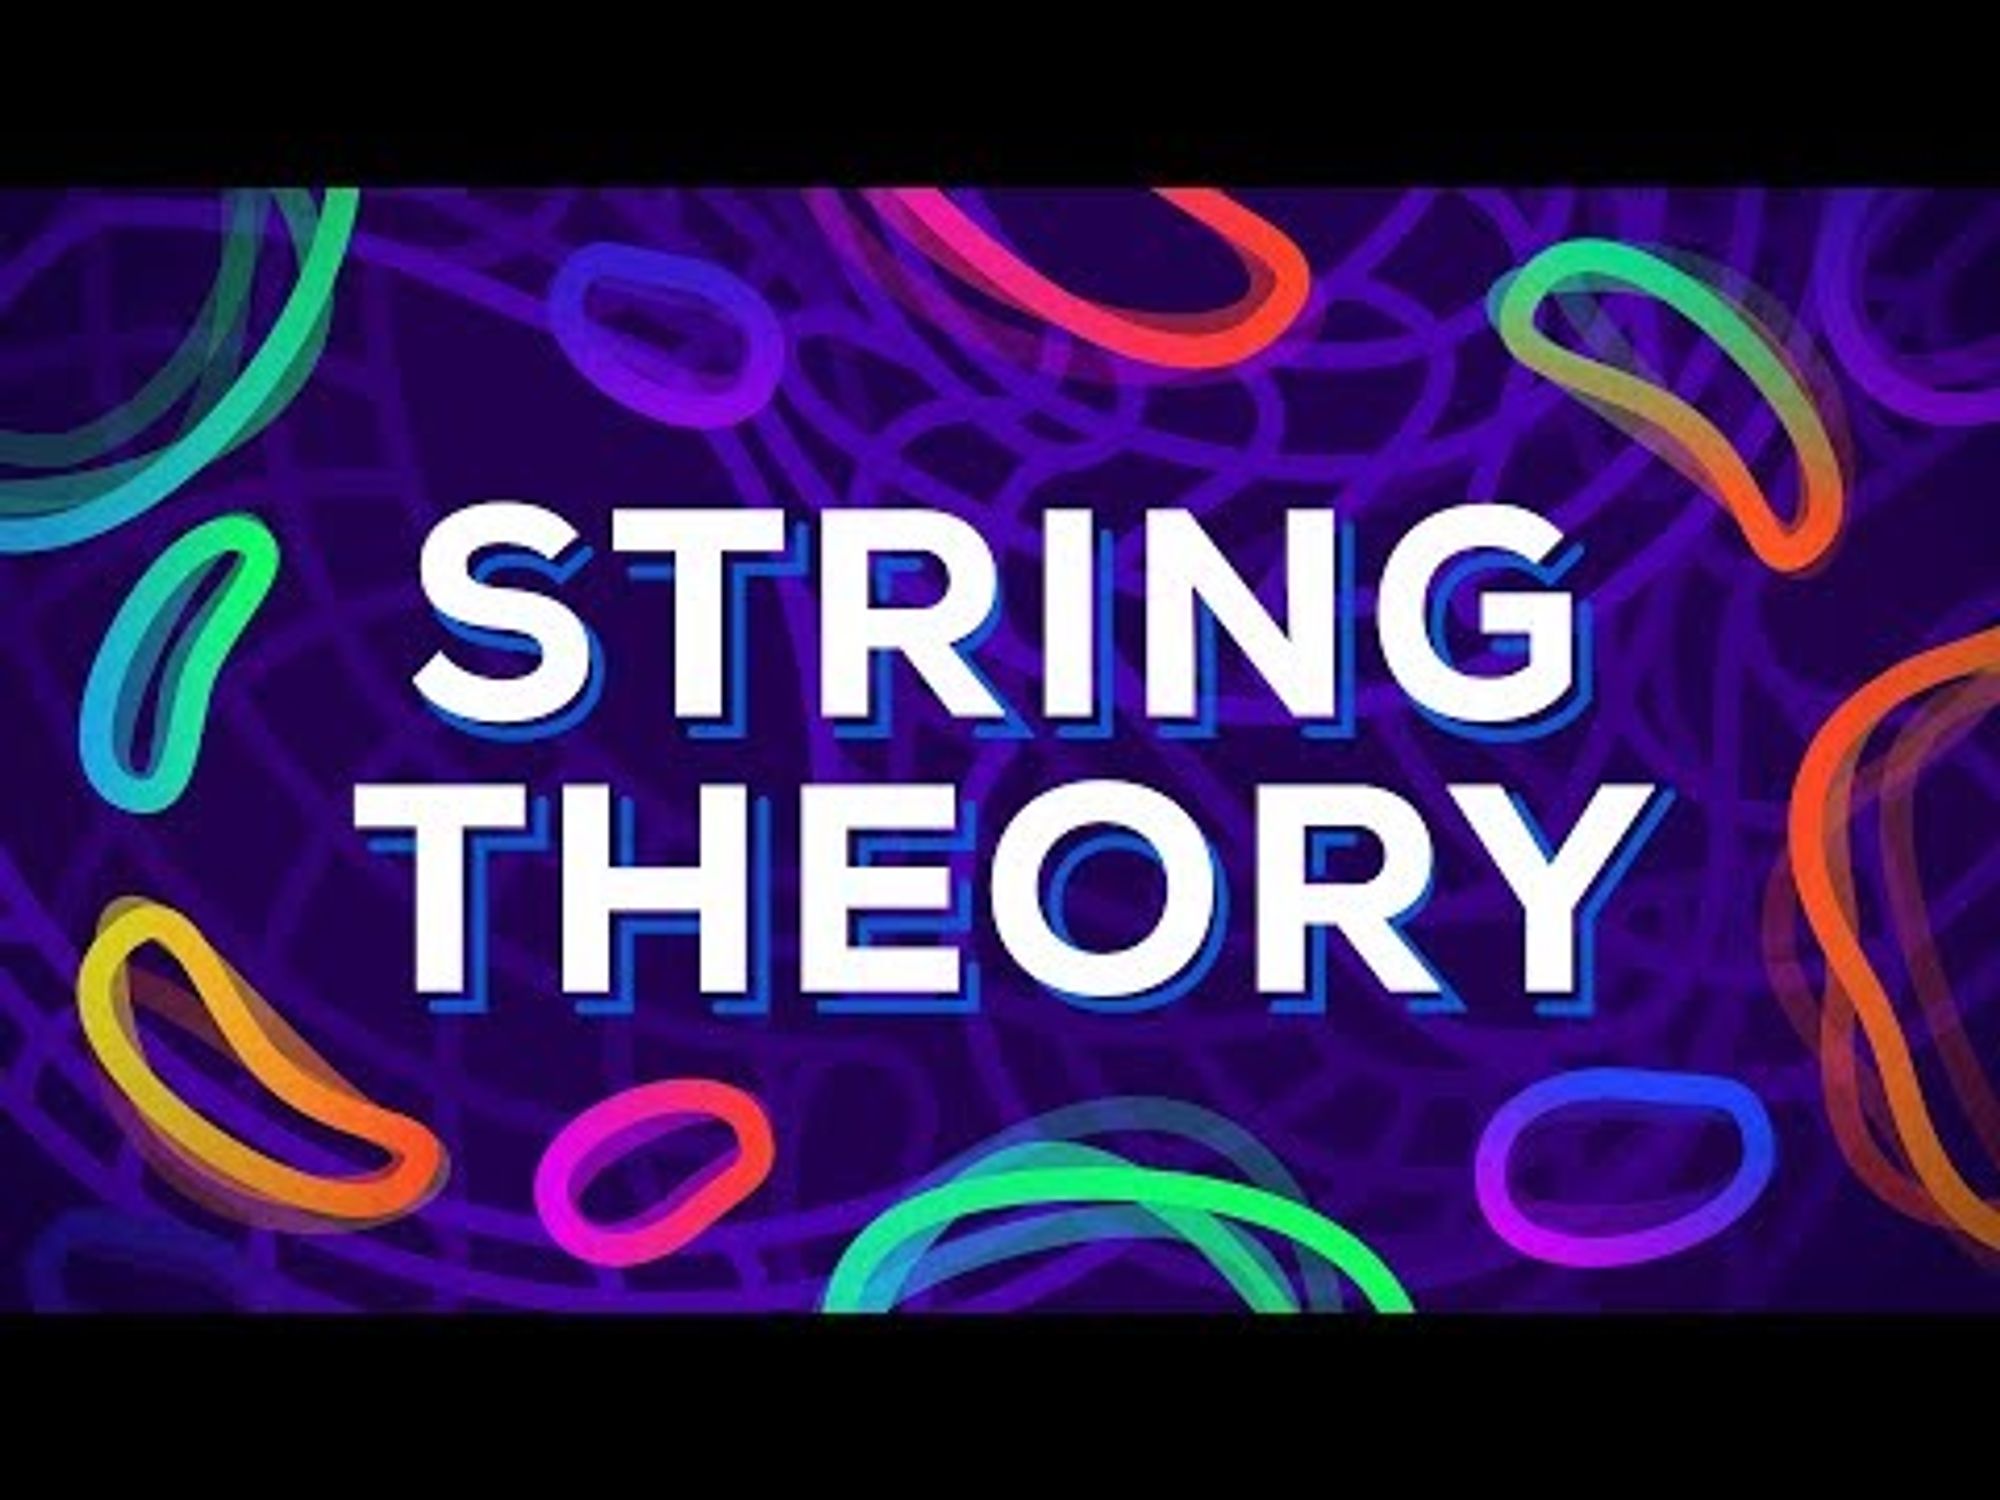 String Theory Explained - What is The True Nature of Reality?